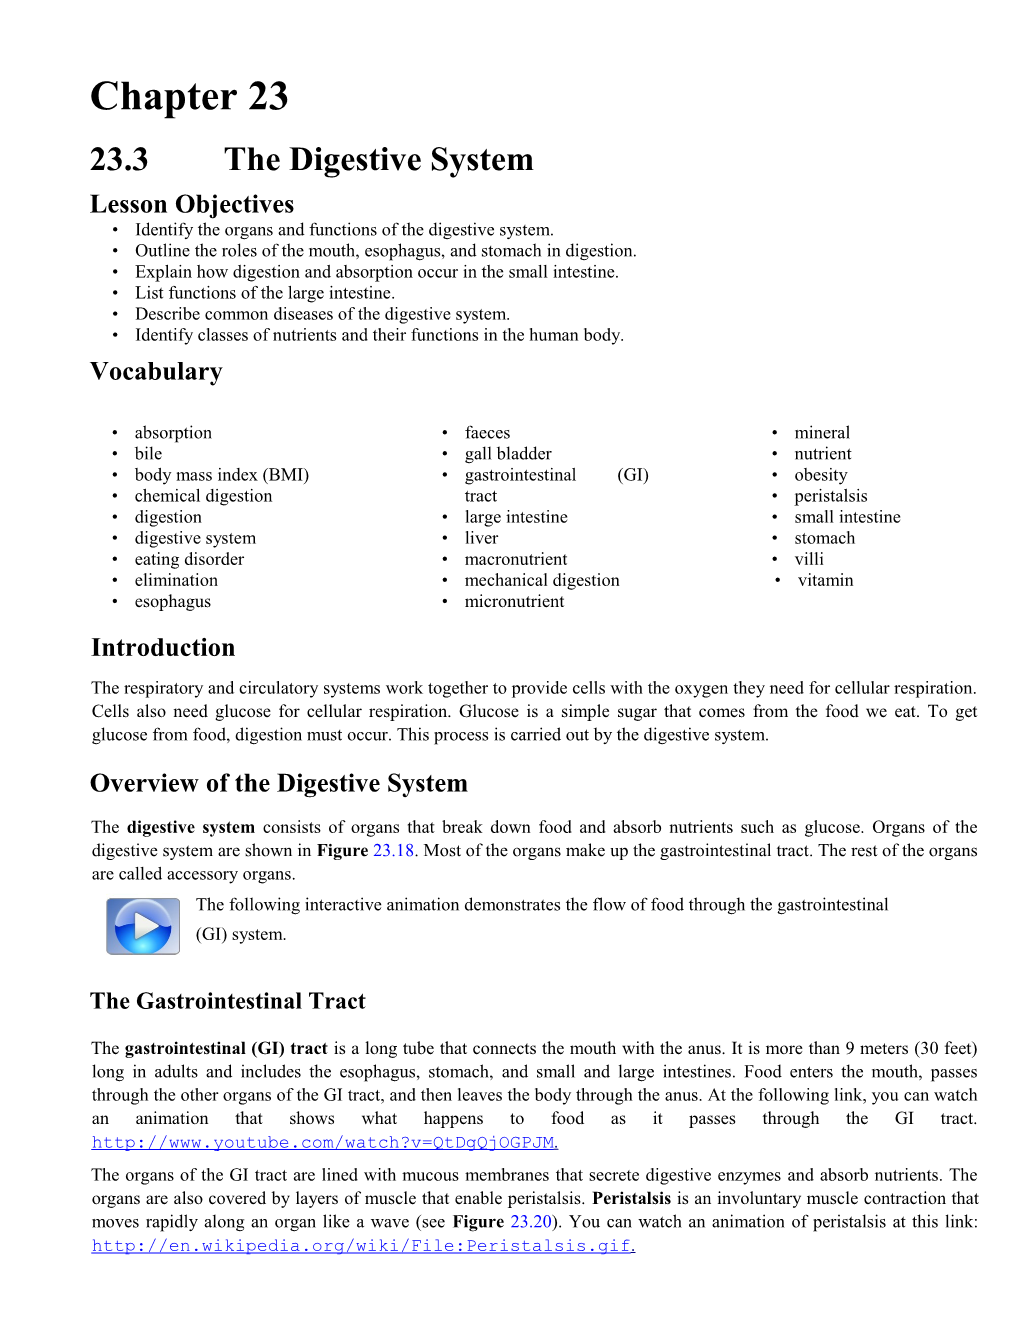 23.3The Digestive System